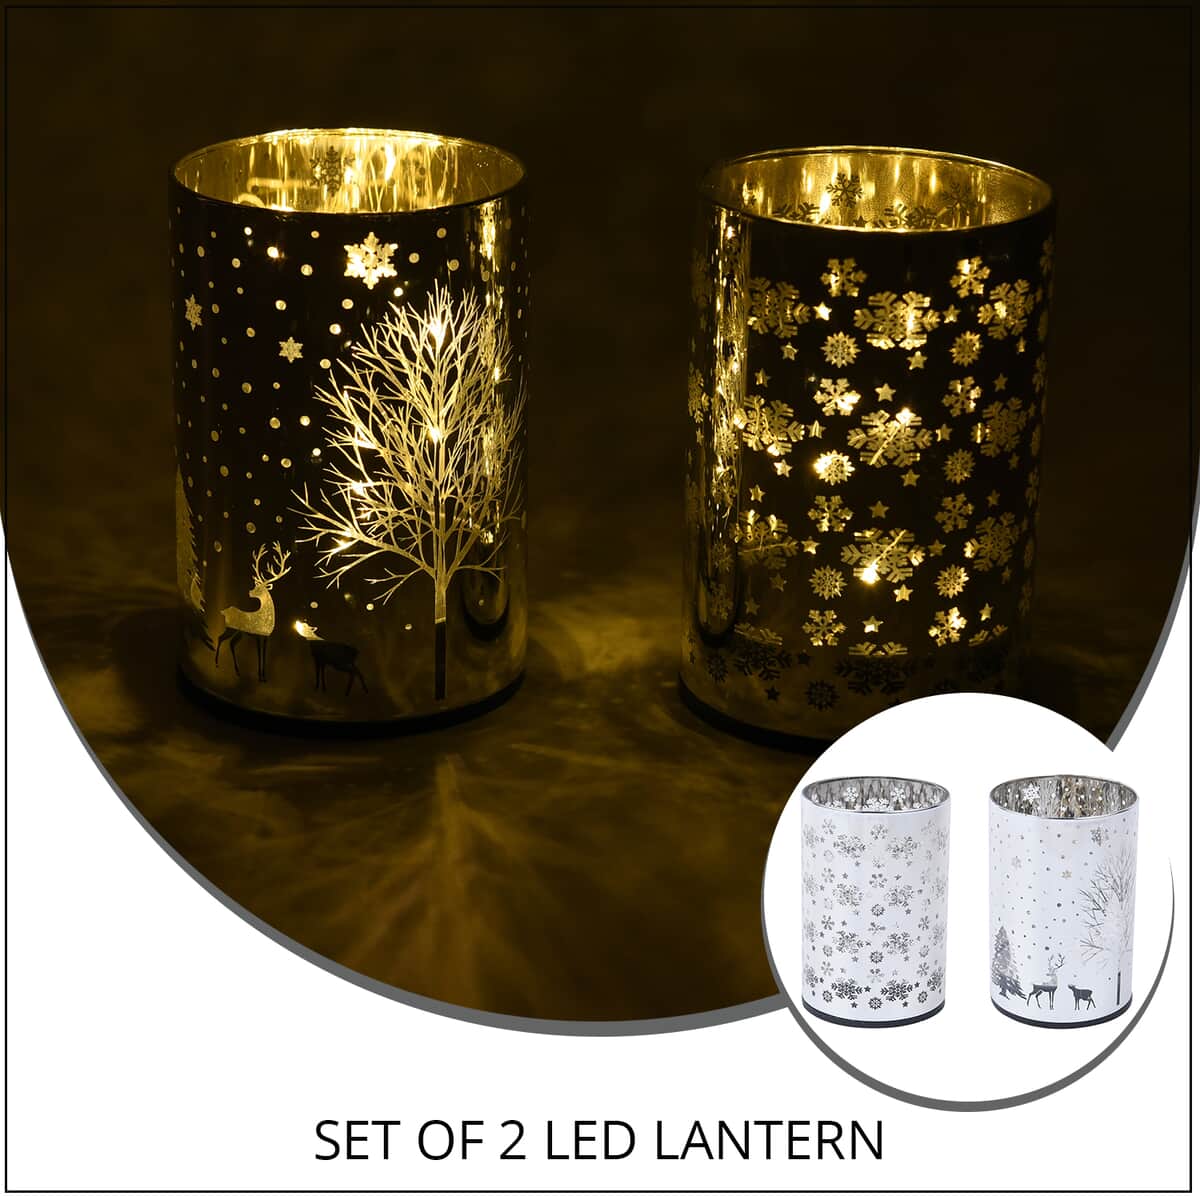 Set of 2 Silver Snowflake Christmas Tree & Deer Pattern LED Lantern For Christmas Decorations, Festive Lanterns LED Light For Tabletop Home Desk Decor (3xAAA Batteries Not Included) image number 1